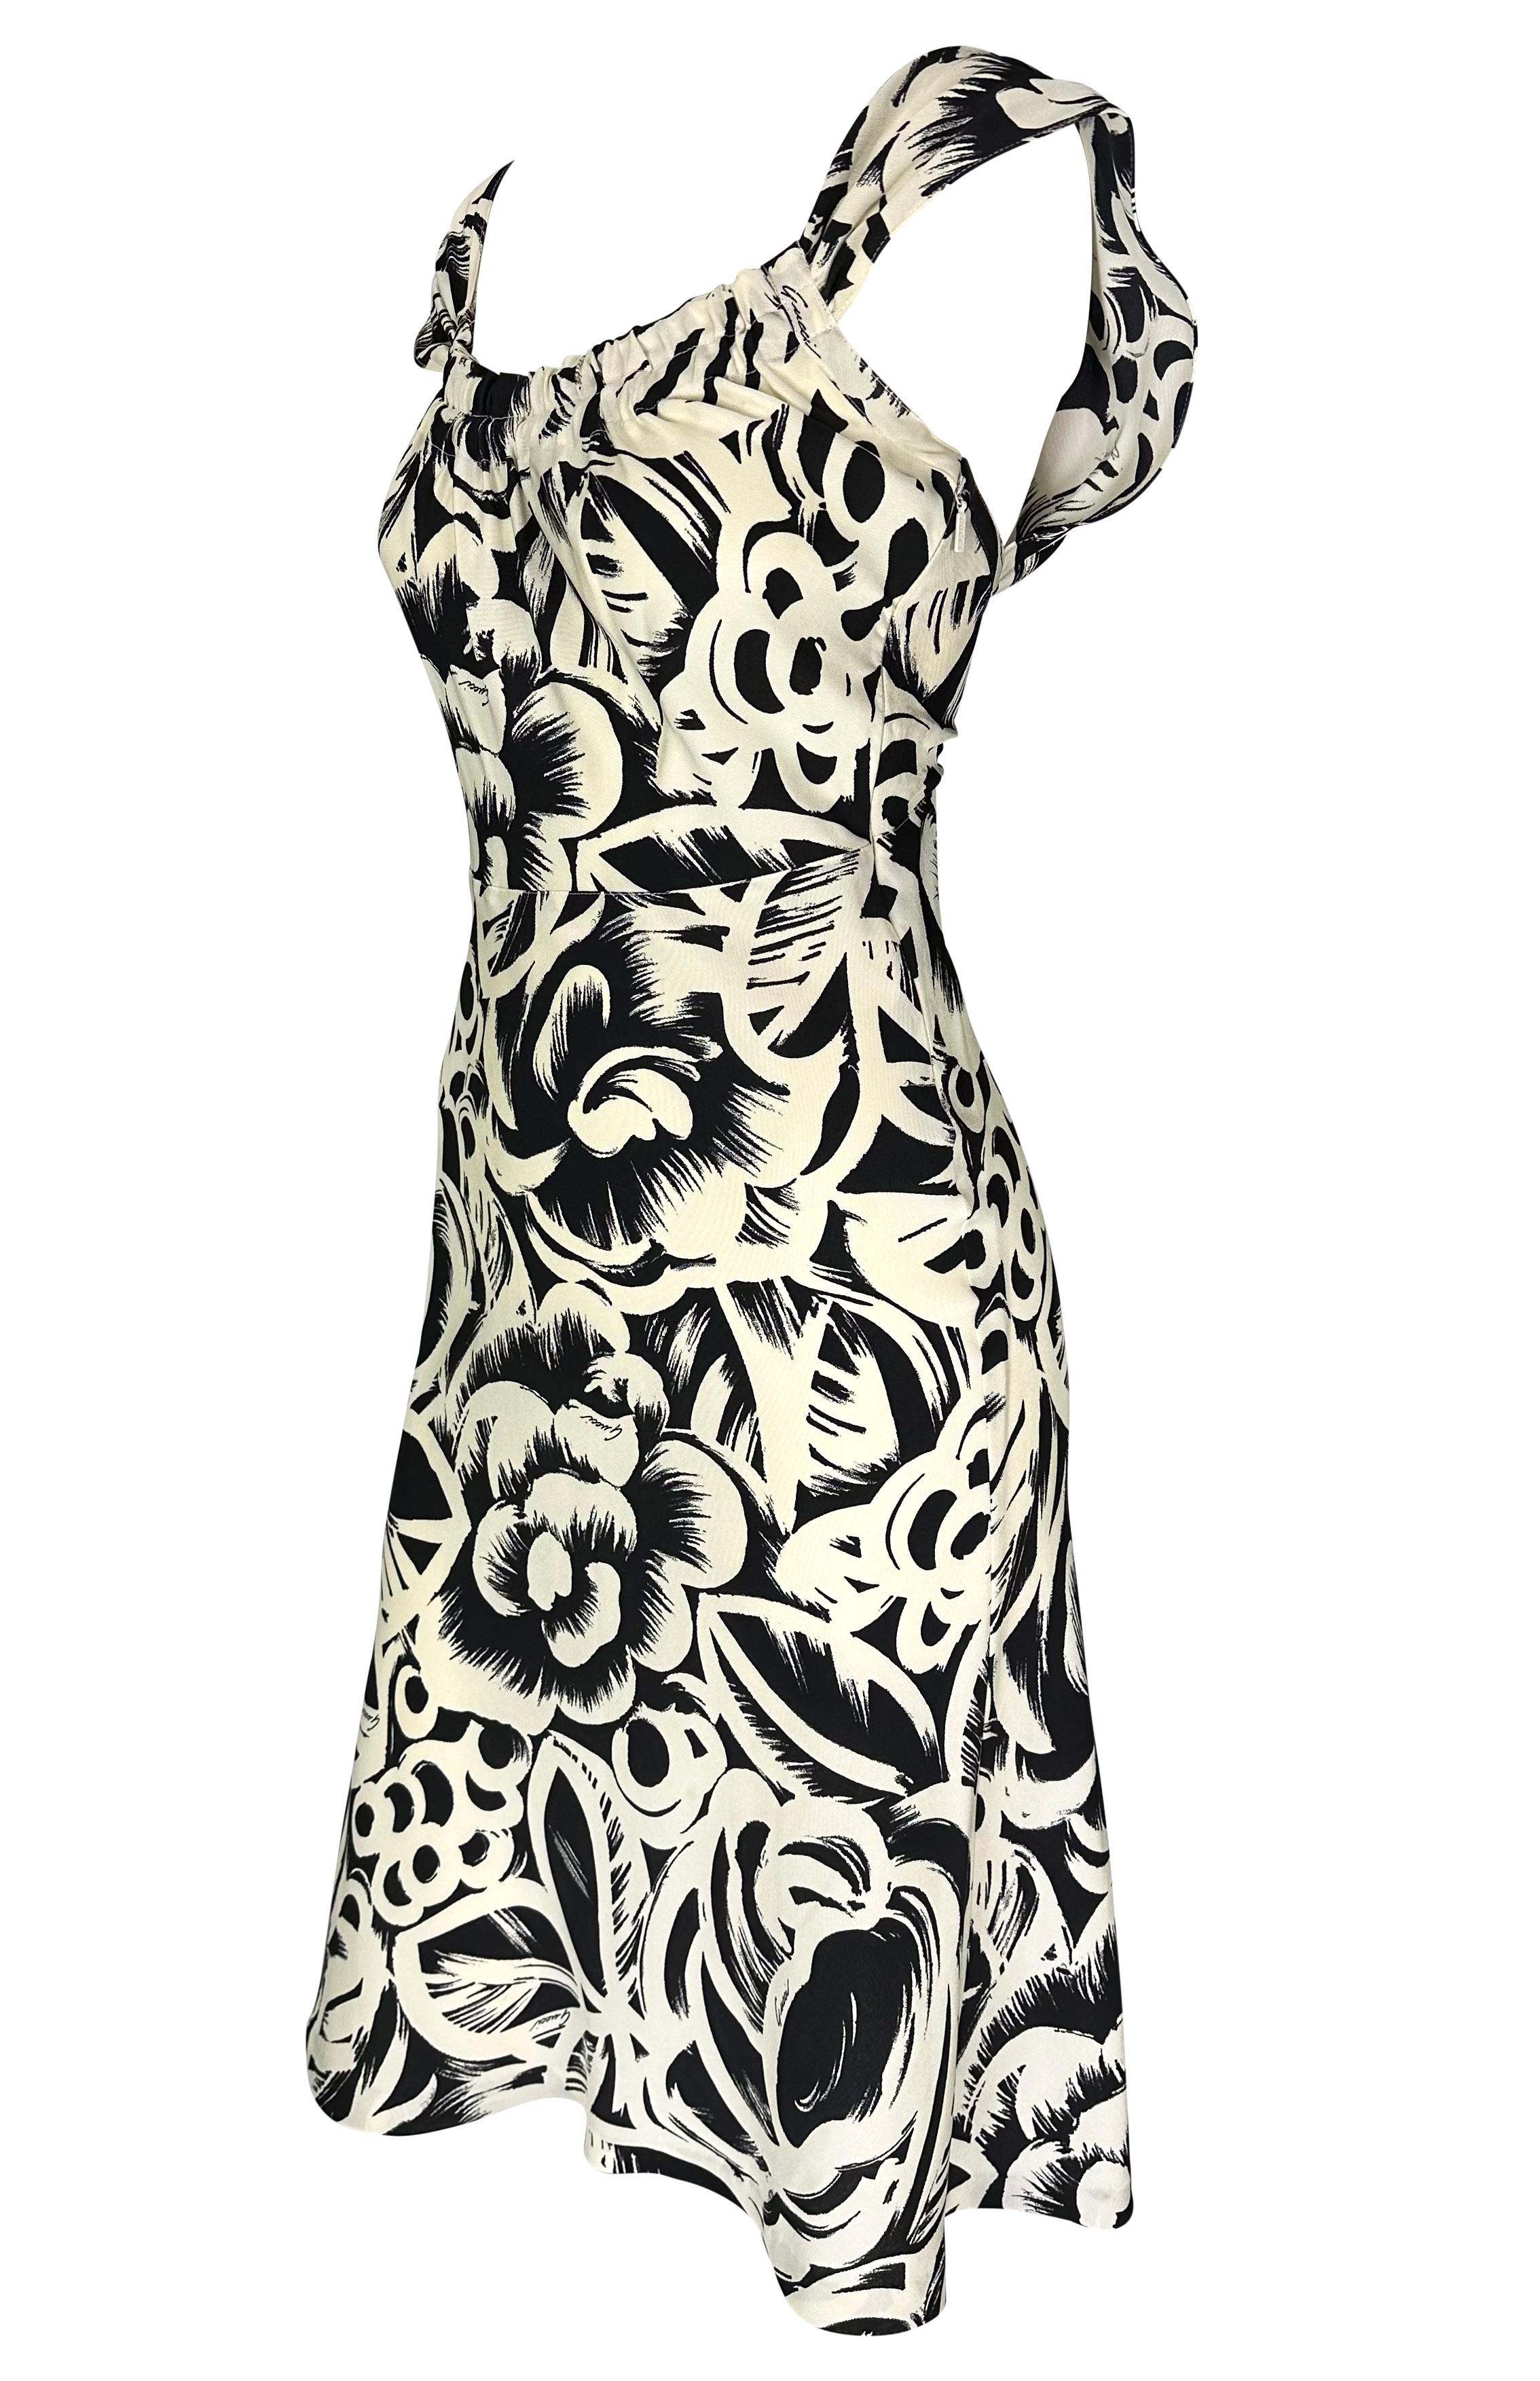 2002 Gucci by Tom Ford Abstract Black White Floral Logo Print Silk Dress In Good Condition For Sale In West Hollywood, CA